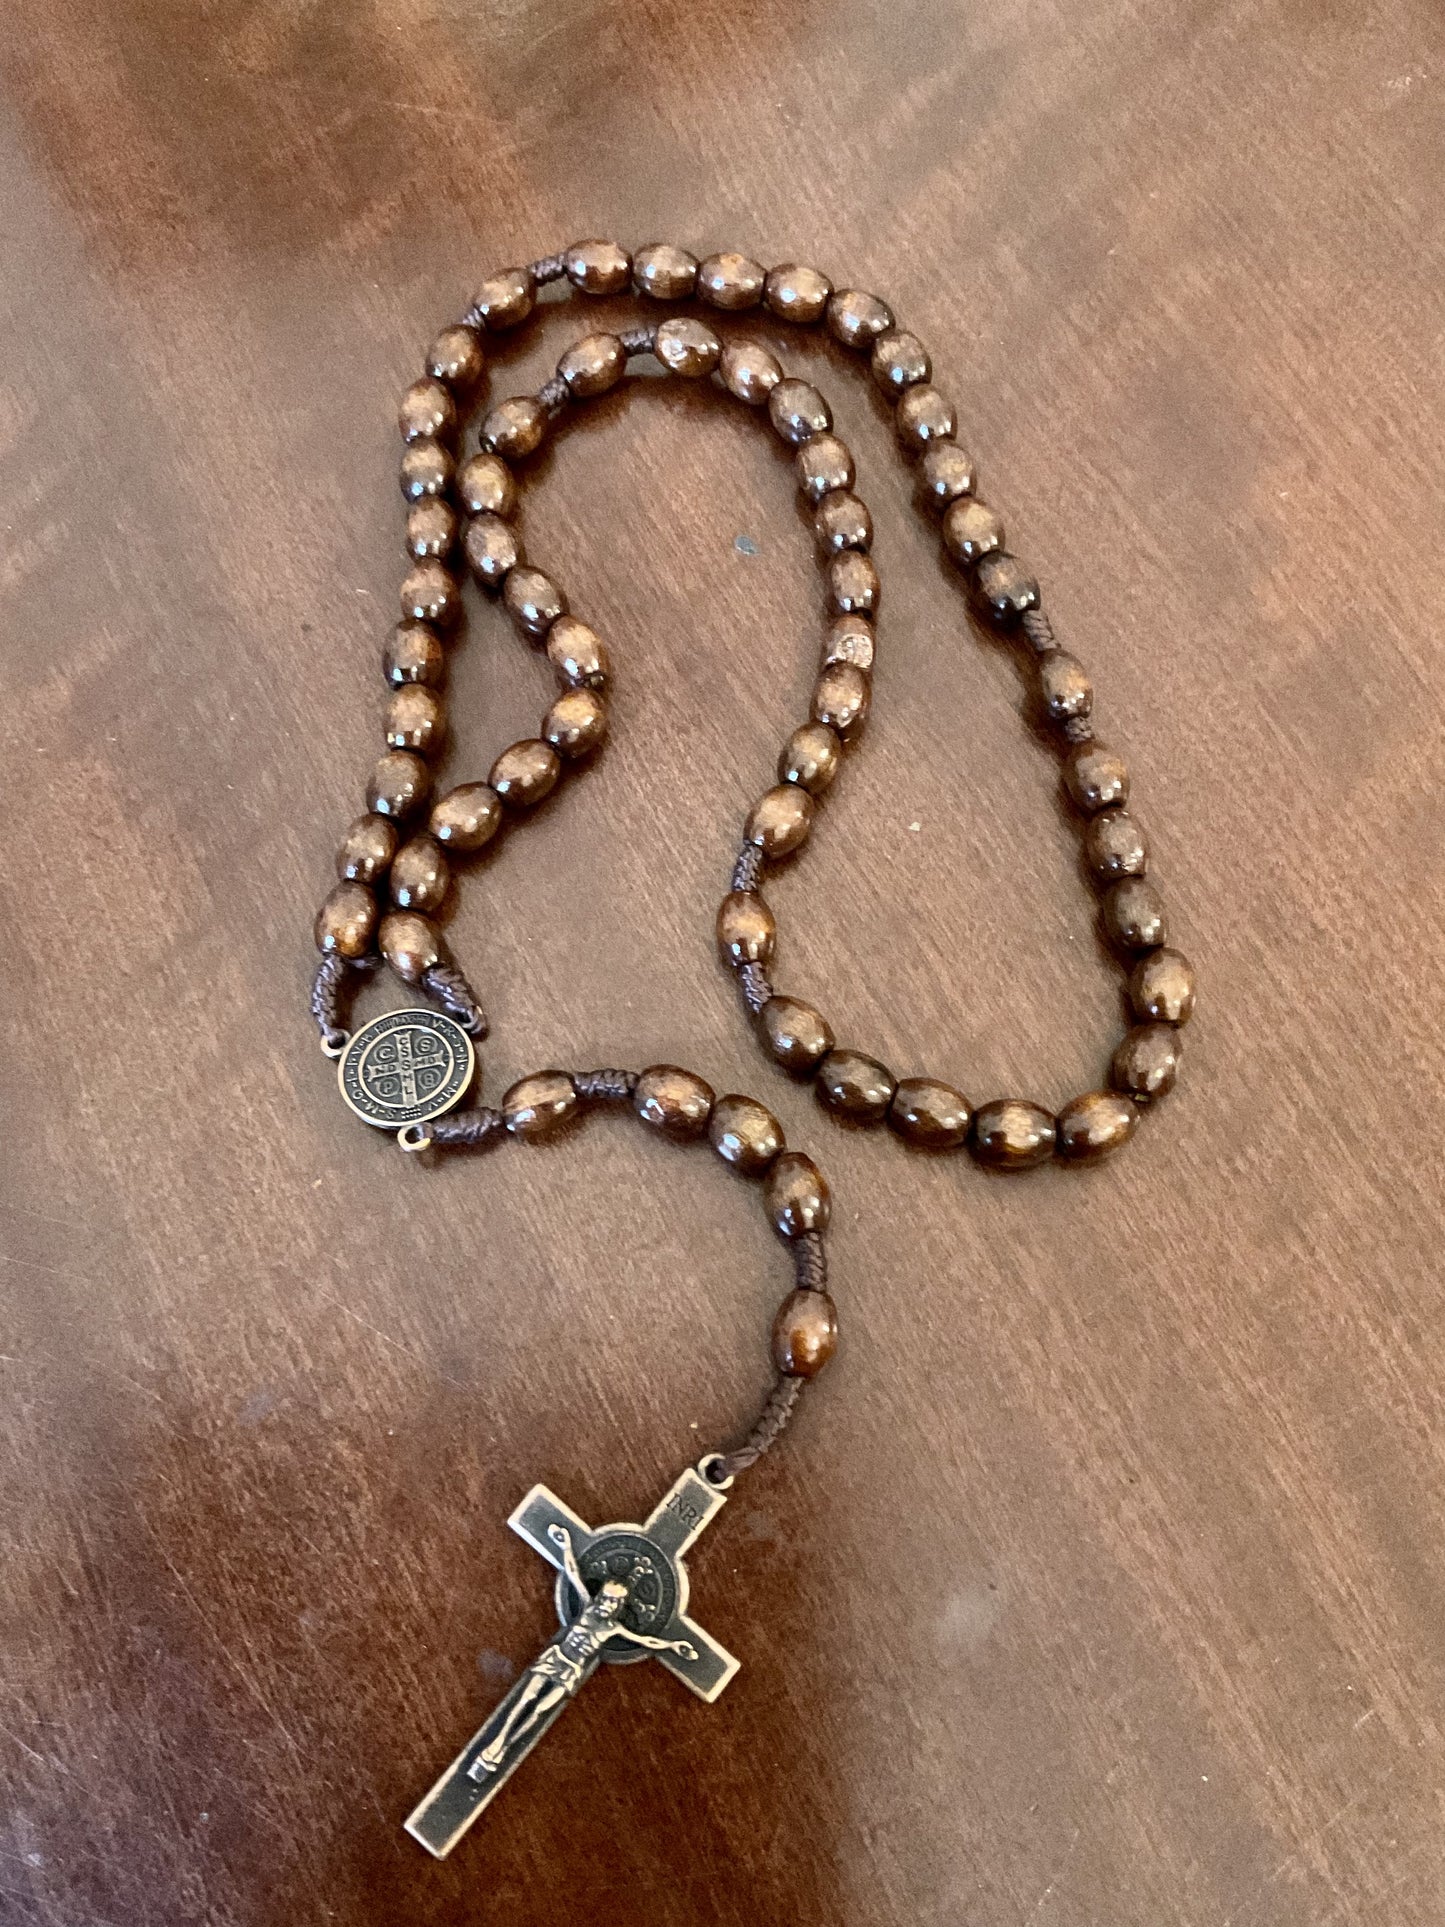 Rosary Beads - wooden